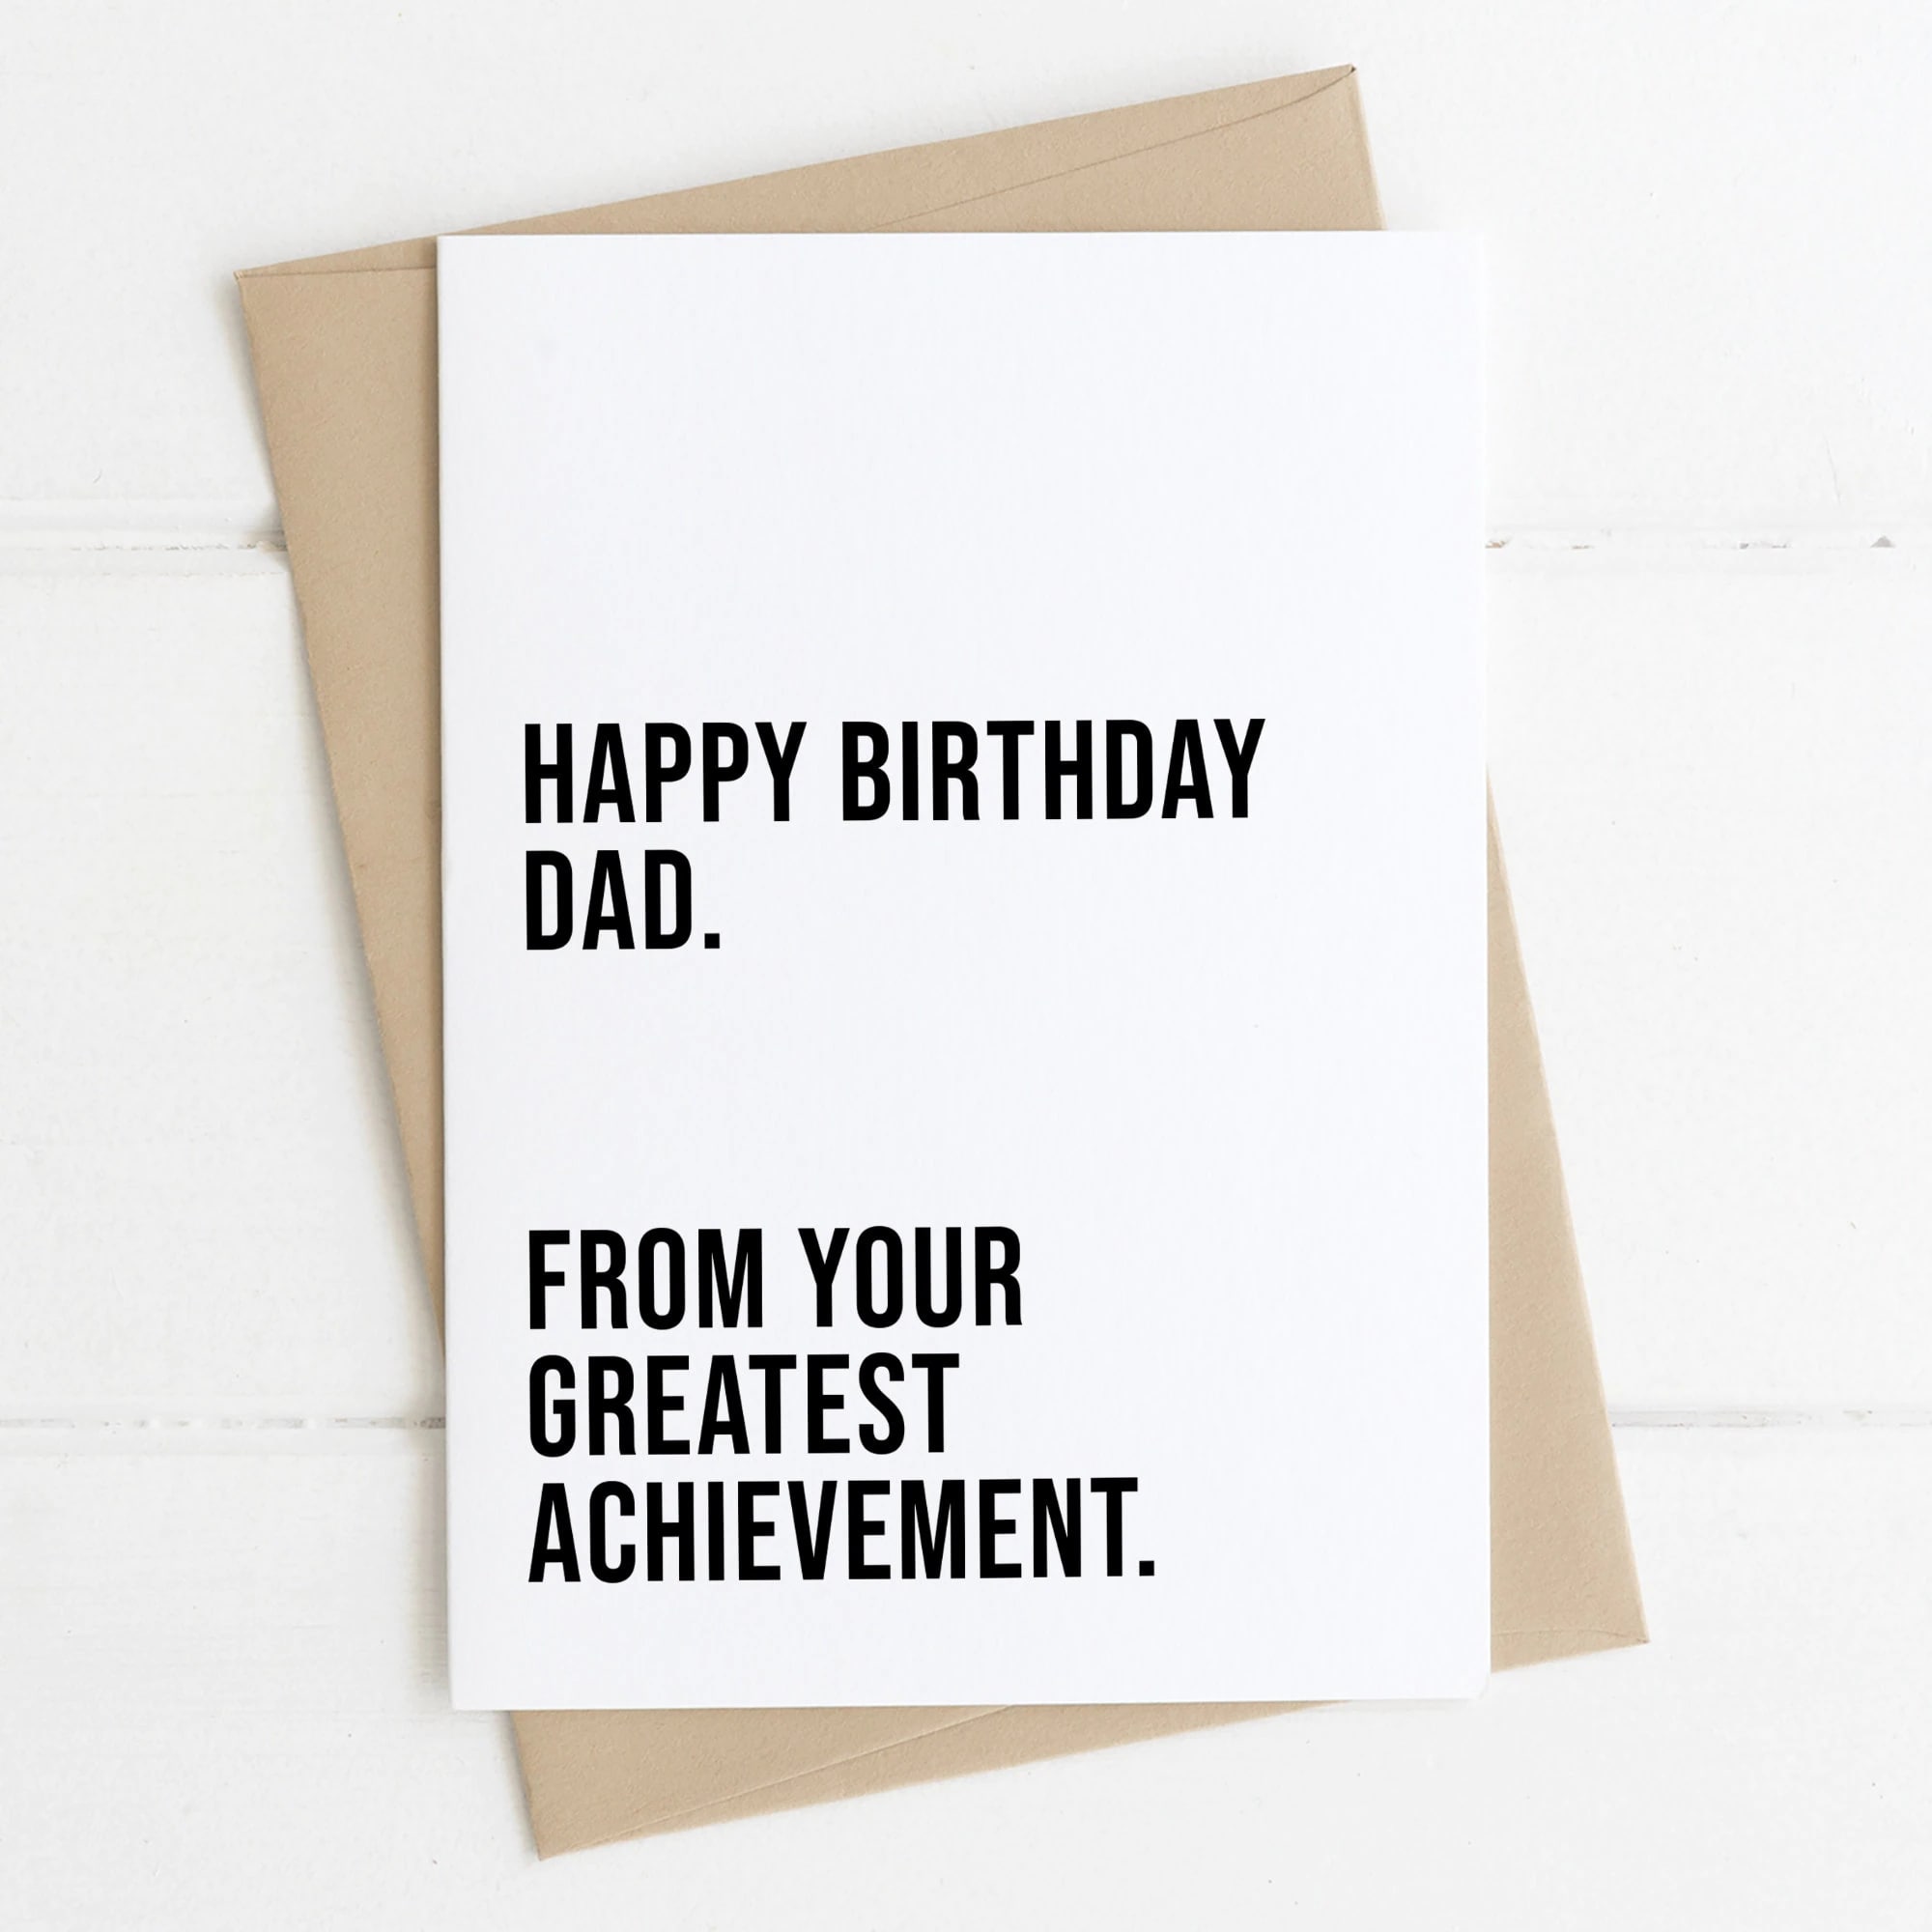 Printable Birthday Cards For Dad_82154